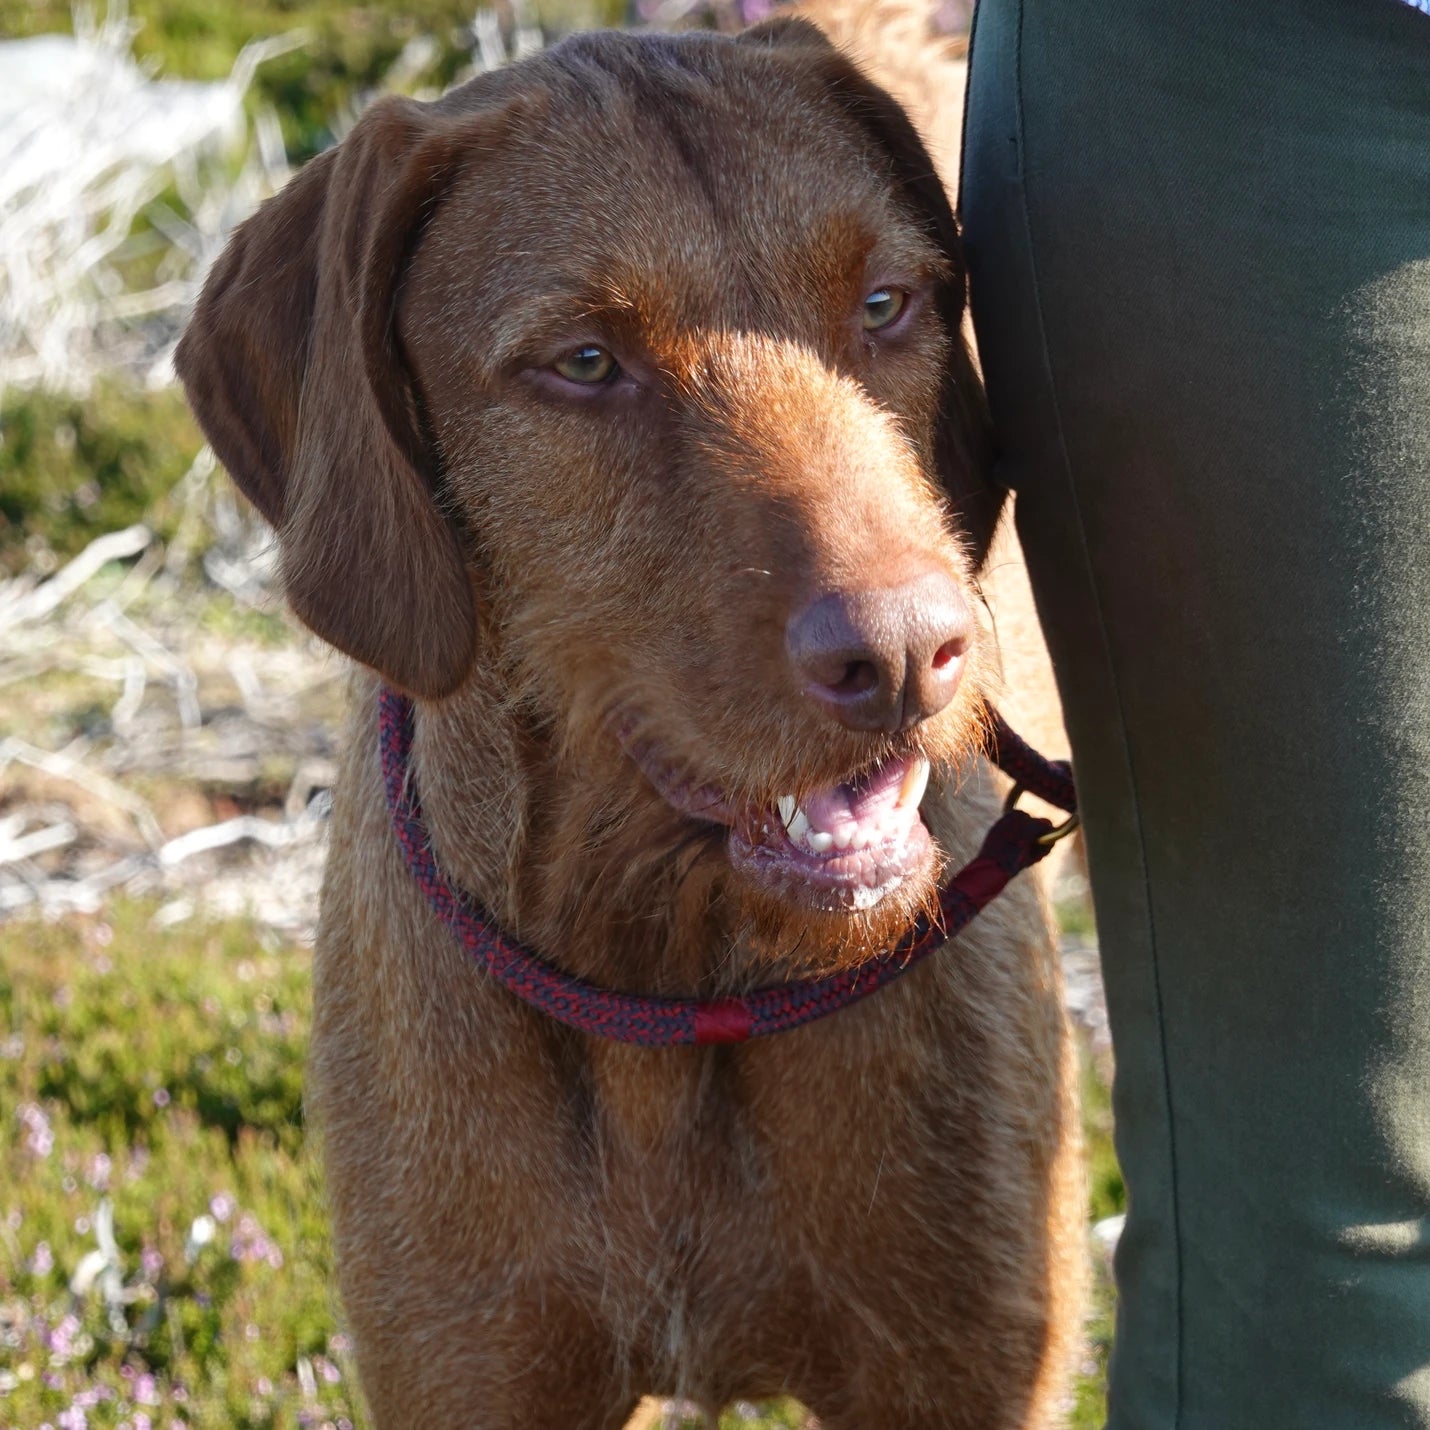 Yogi (The Wirehaired Vizsla) is 2 years old